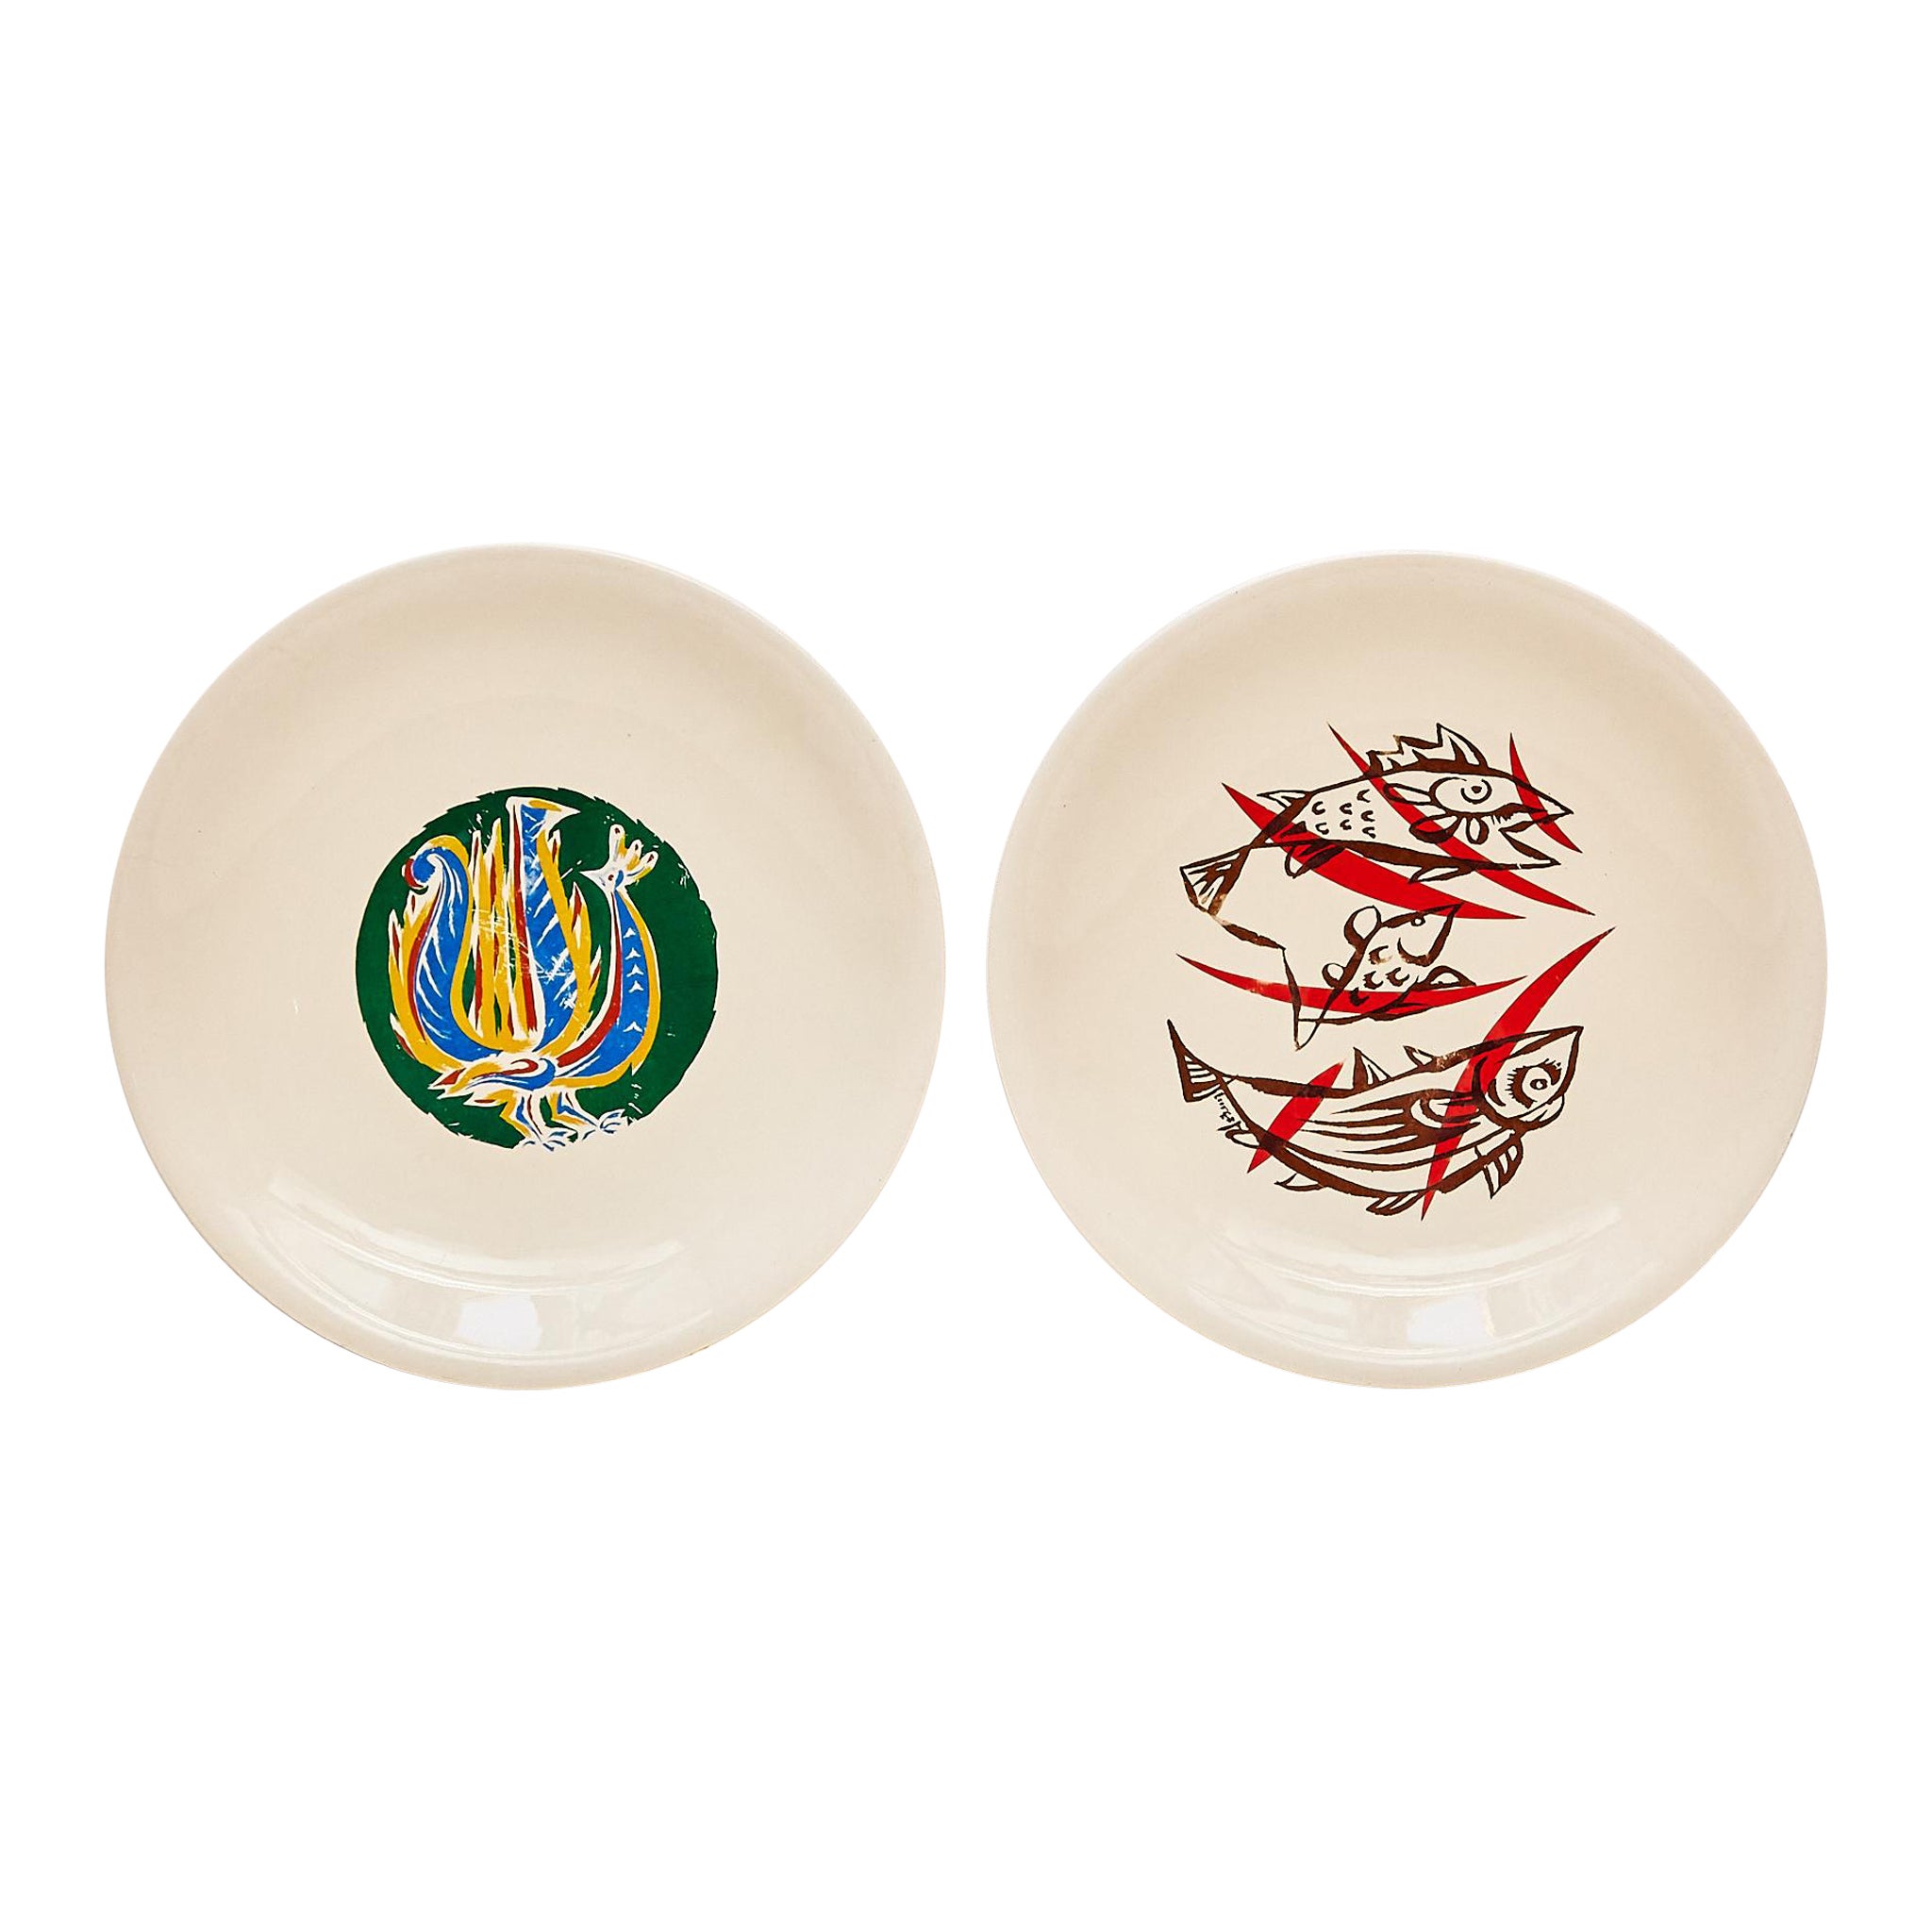 Elegant Duo: Marc Saint-Seans' Signed Plates from 1950s France For Sale